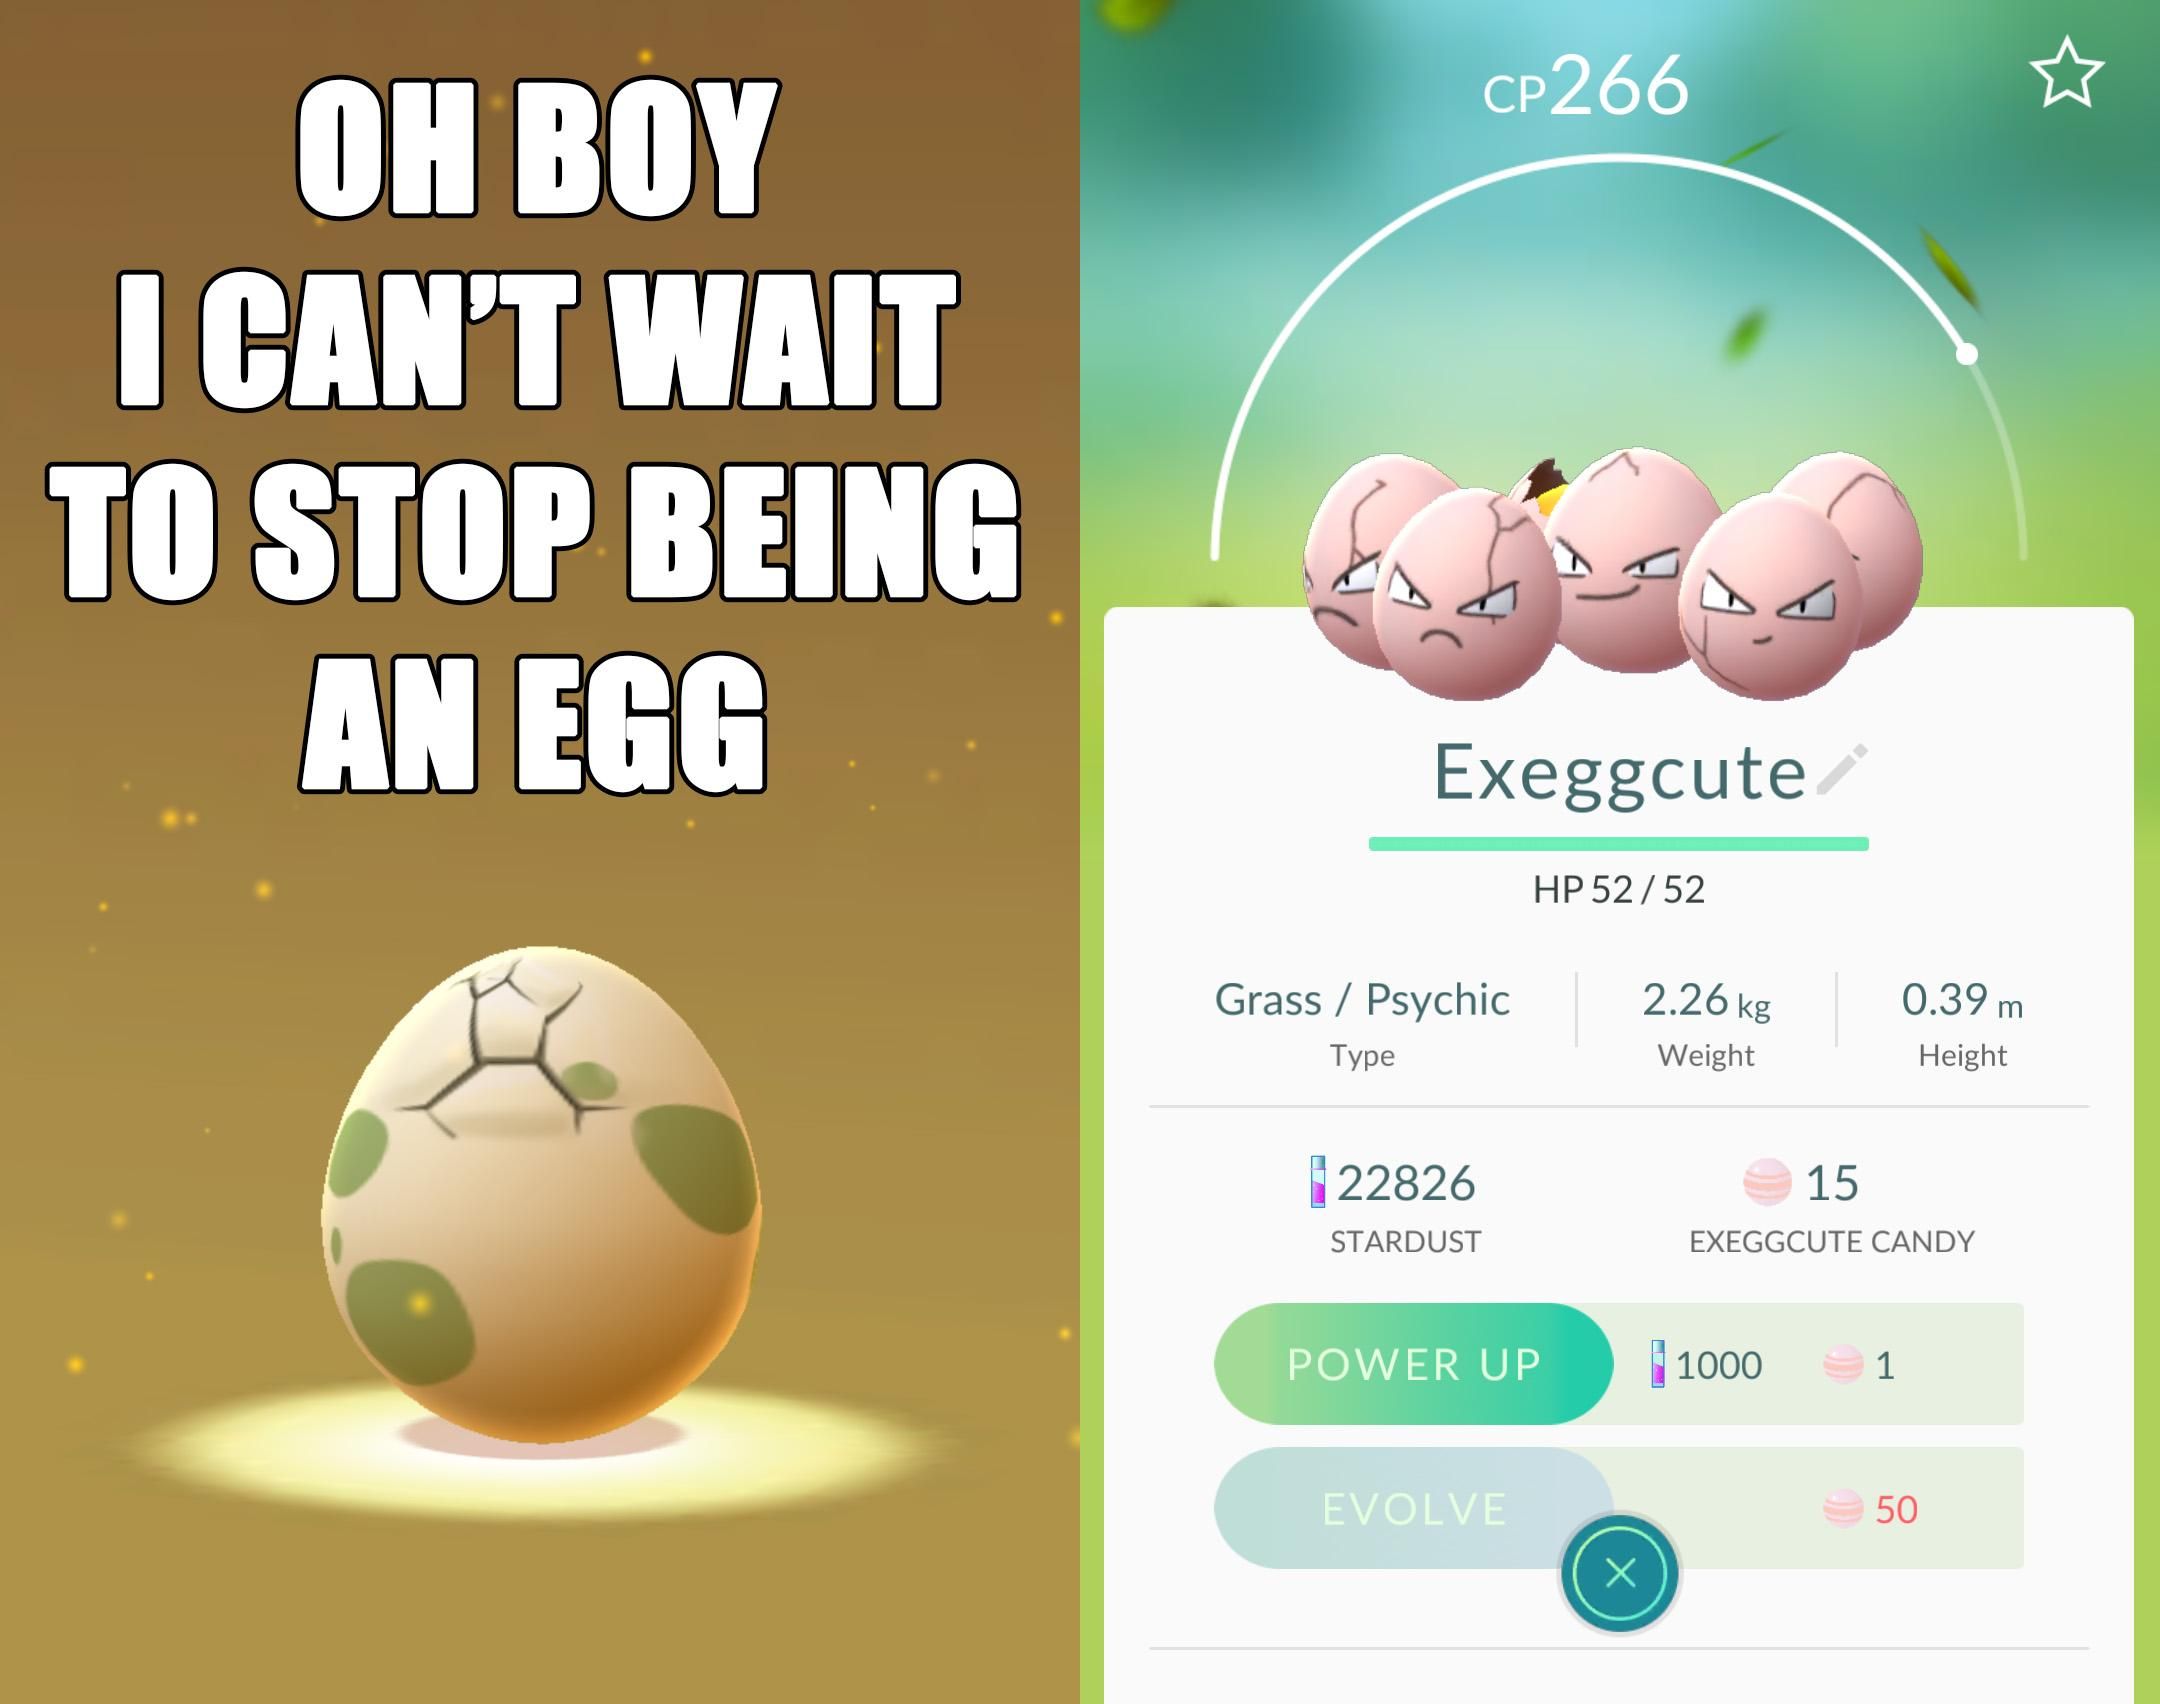 My 5km egg just hatched...